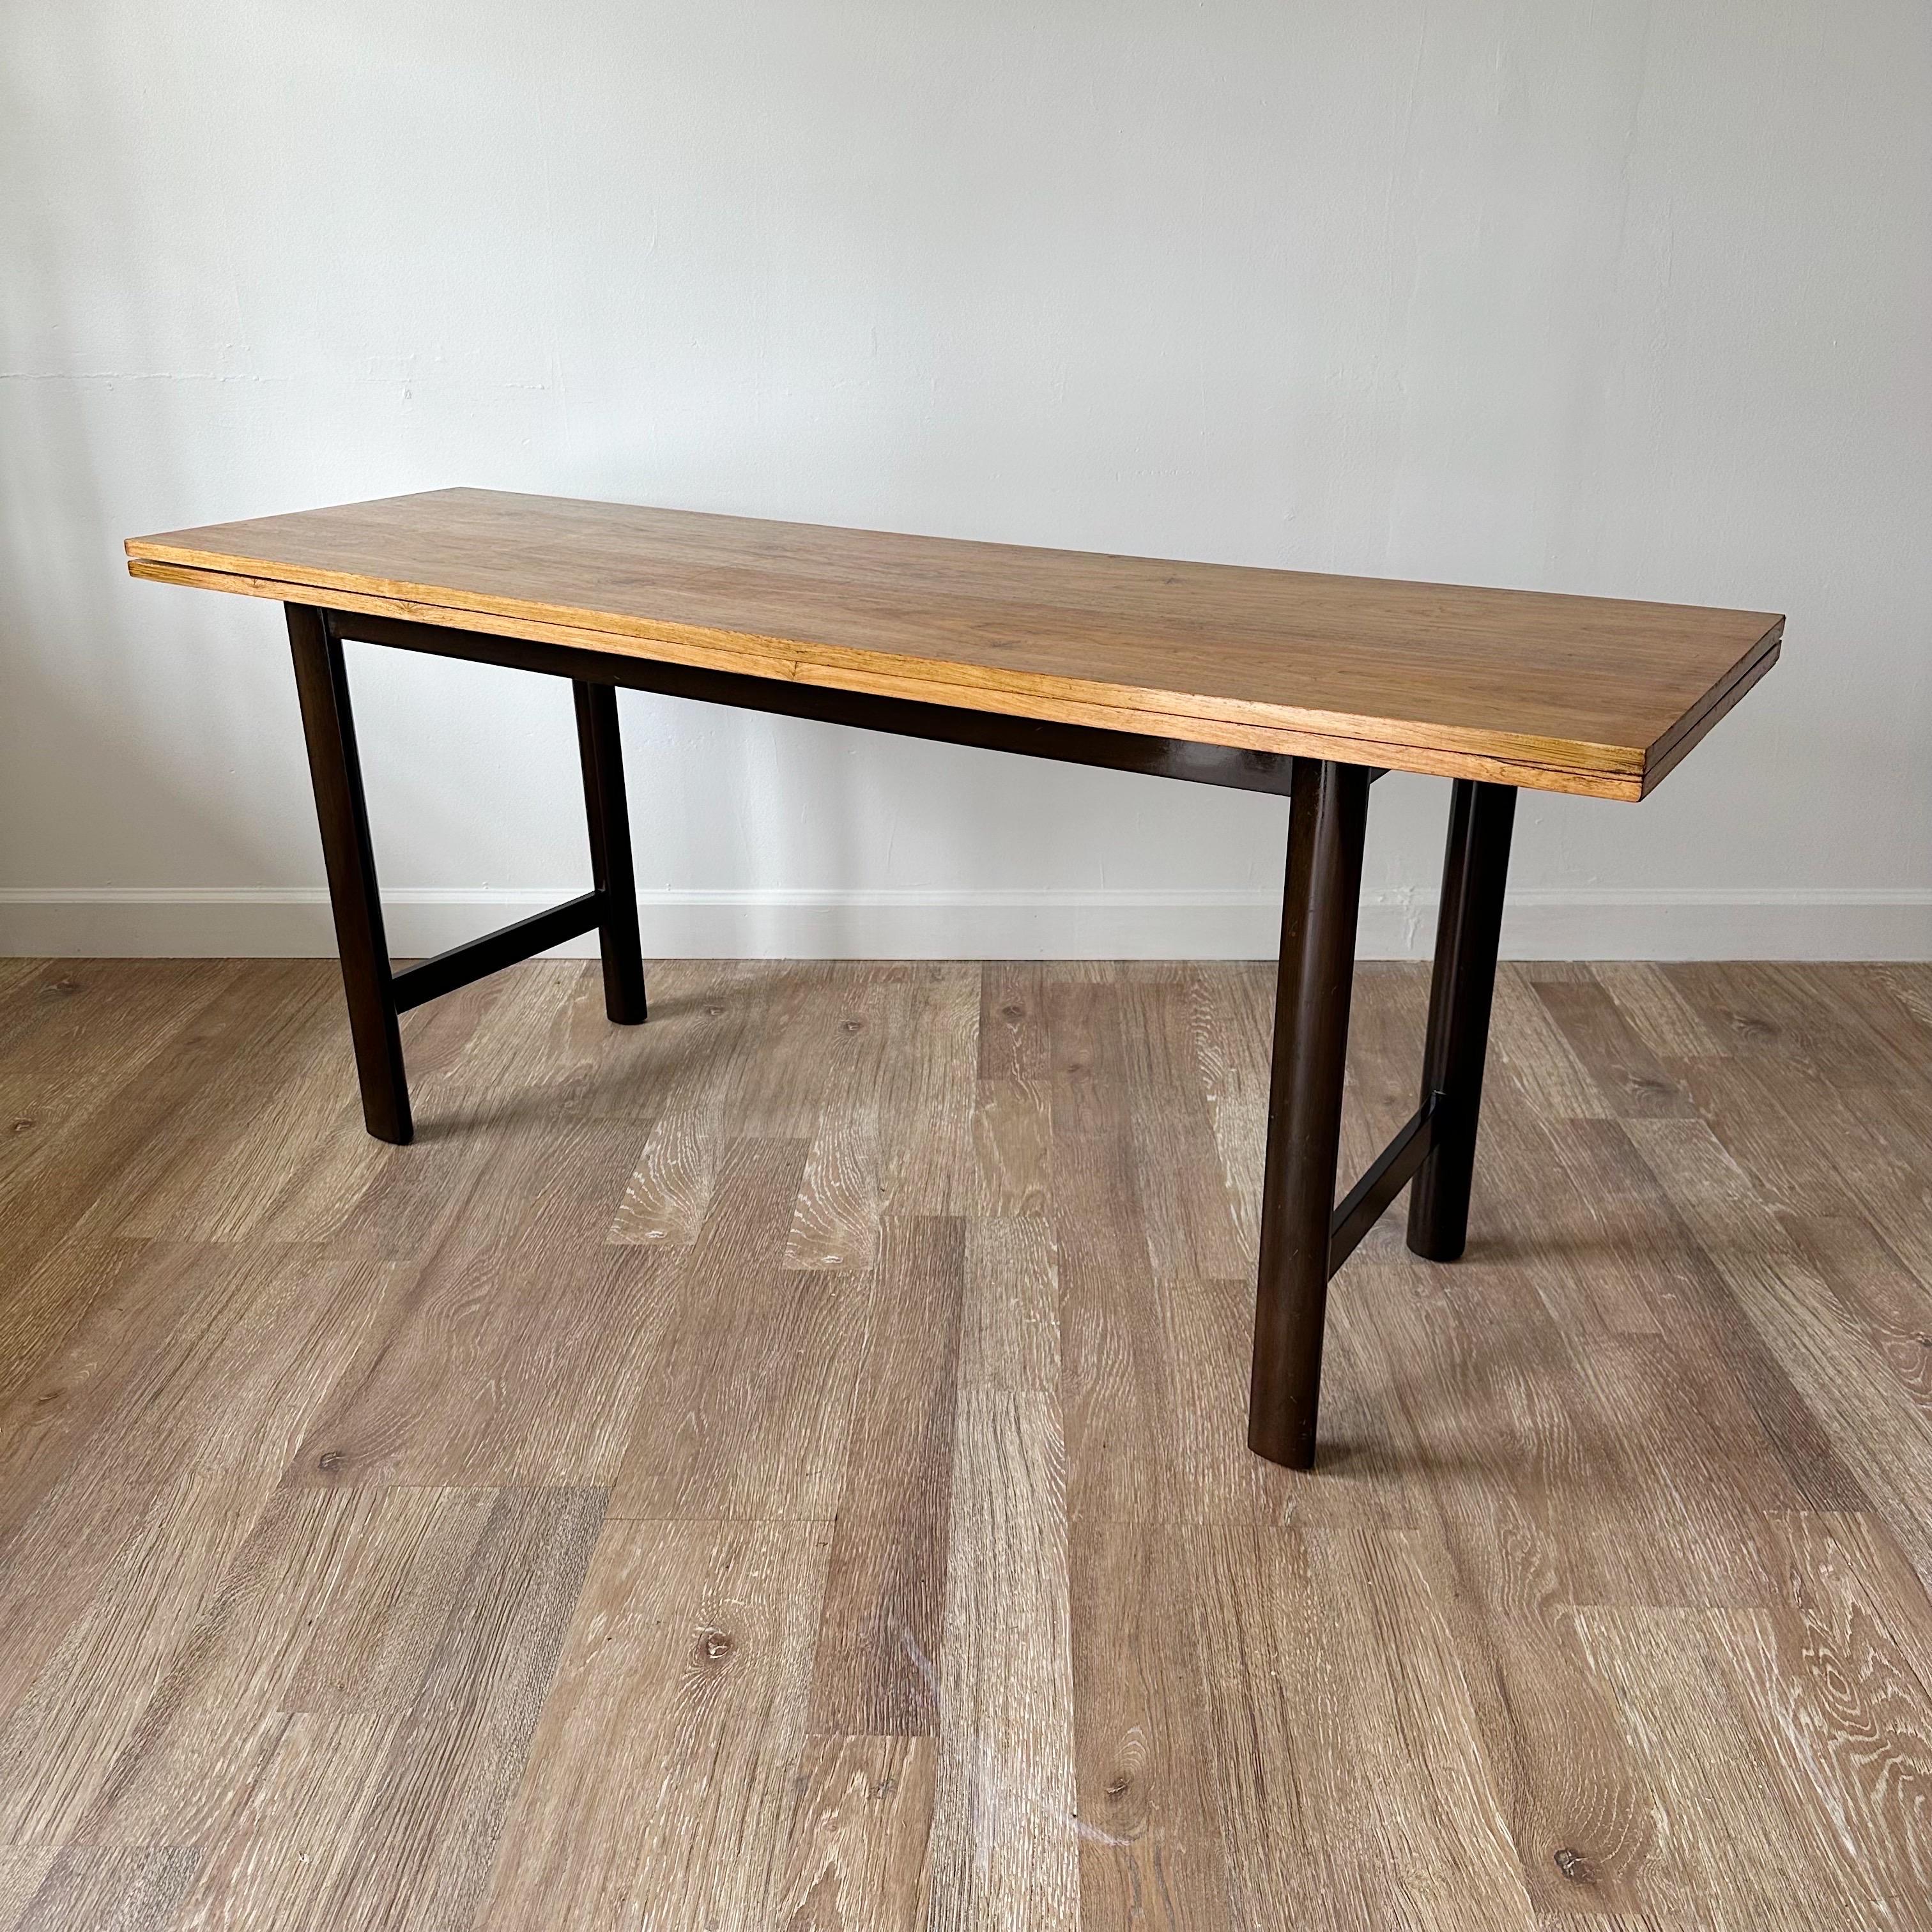 Versatile flip-top console table to be used as console or small dining table. 20 inches deep closed,opens to 40 inches. Table surface with stunning  rosewood with ebonized walnut legs.